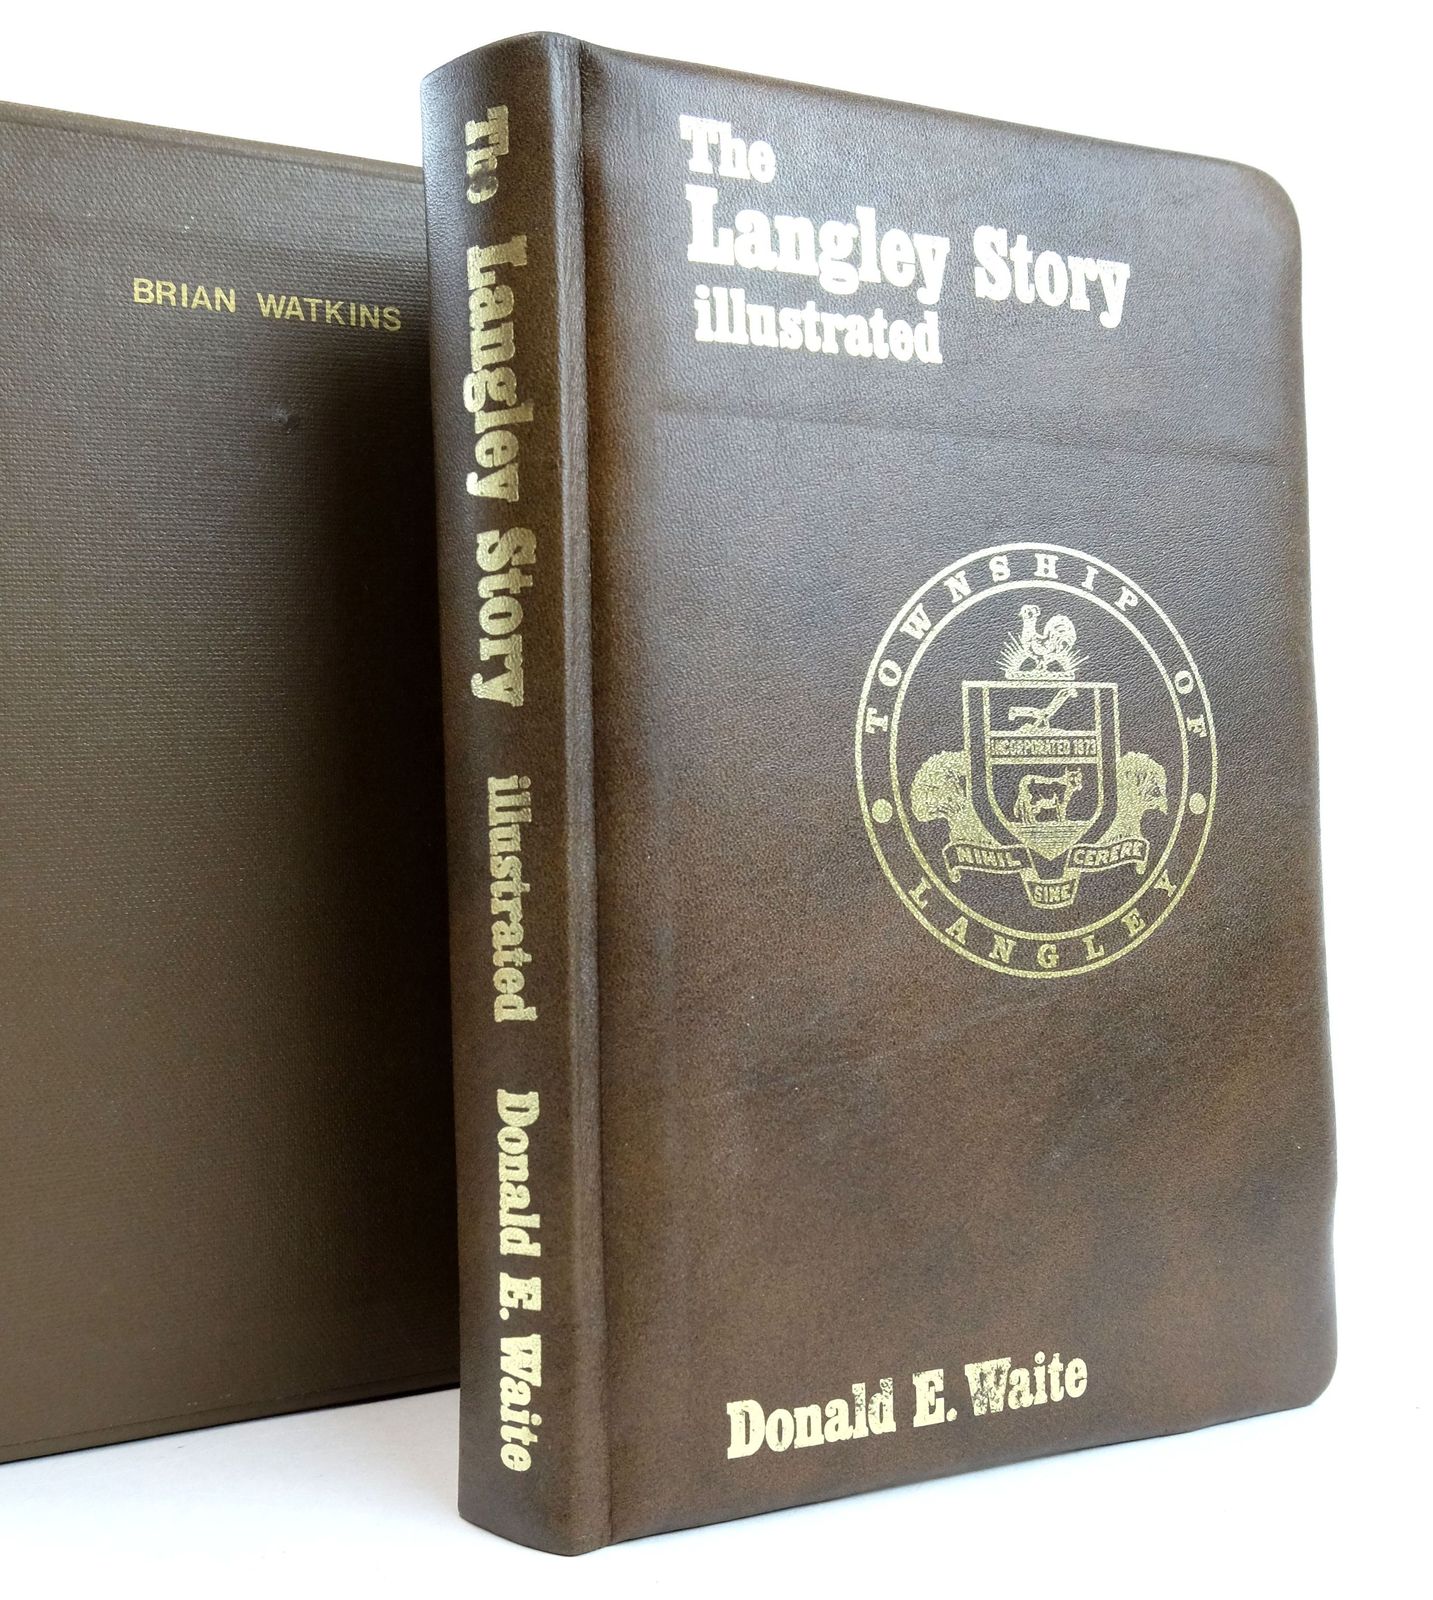 Photo of THE LANGLEY STORY ILLUSTRATED written by Waite, Donald E. (STOCK CODE: 1819555)  for sale by Stella & Rose's Books